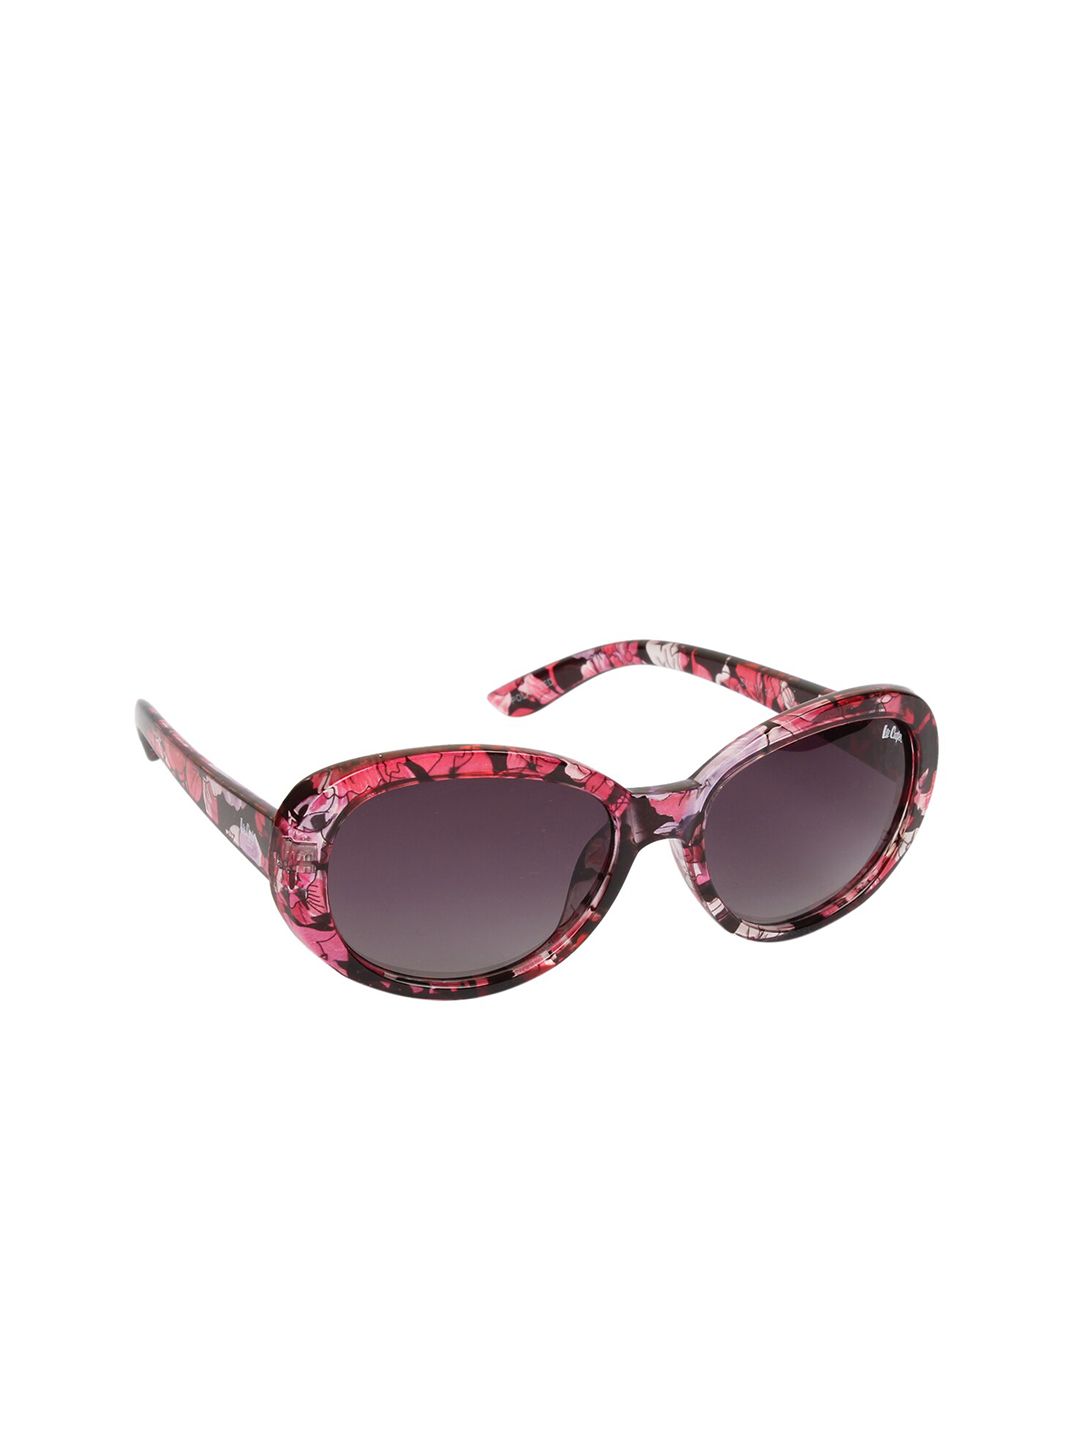 Lee Cooper Women Grey Lens & Purple Butterfly Sunglasses with Polarised Lens Price in India